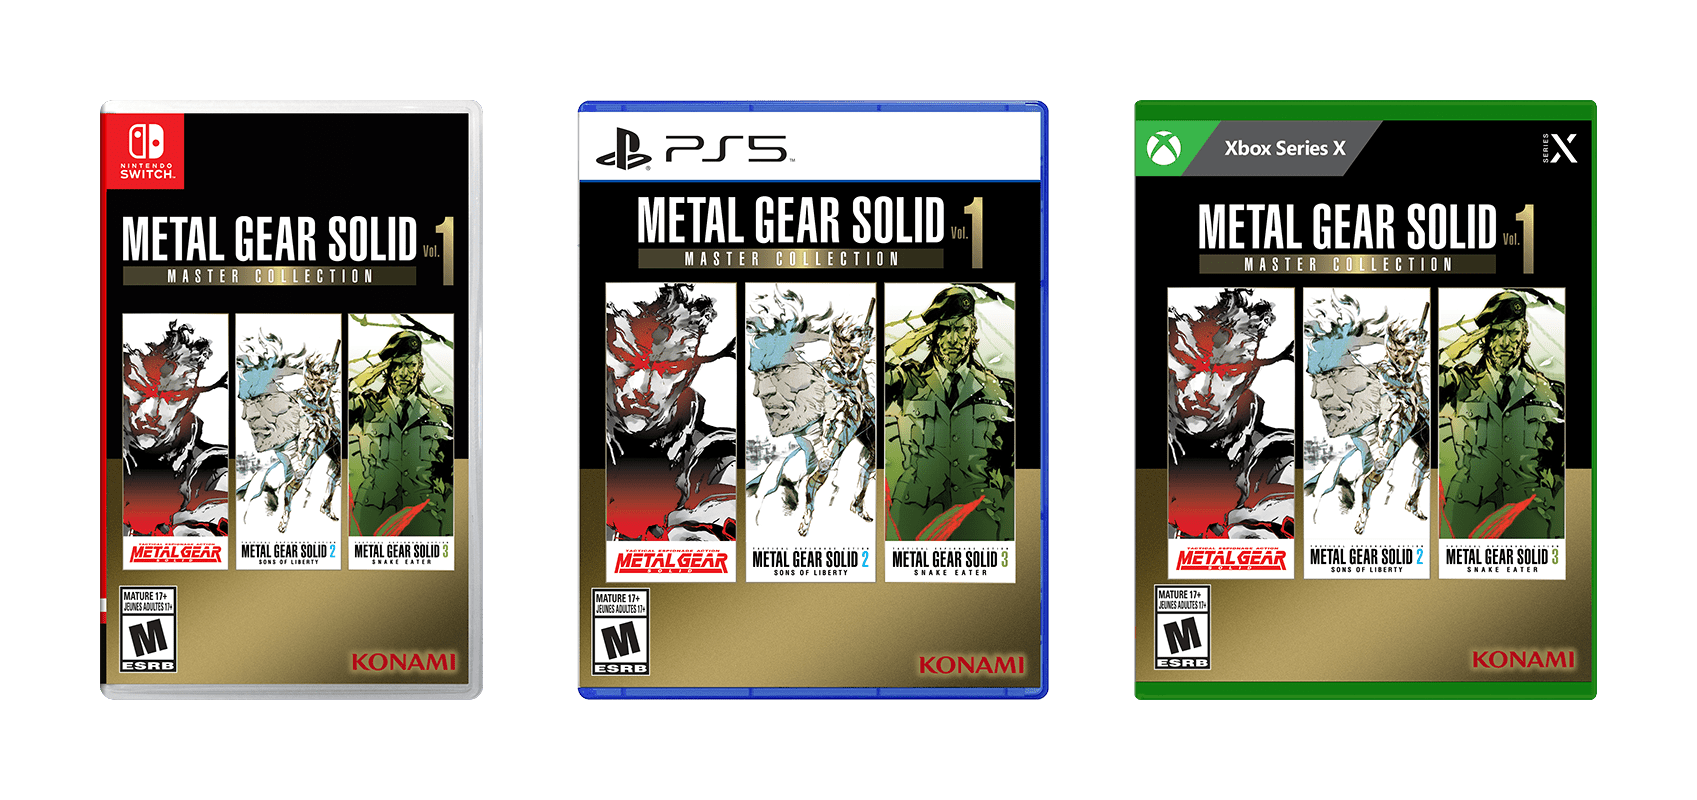 Metal Gear Solid: Master Collection Vol. 1 also includes Metal Gear 1 and 2